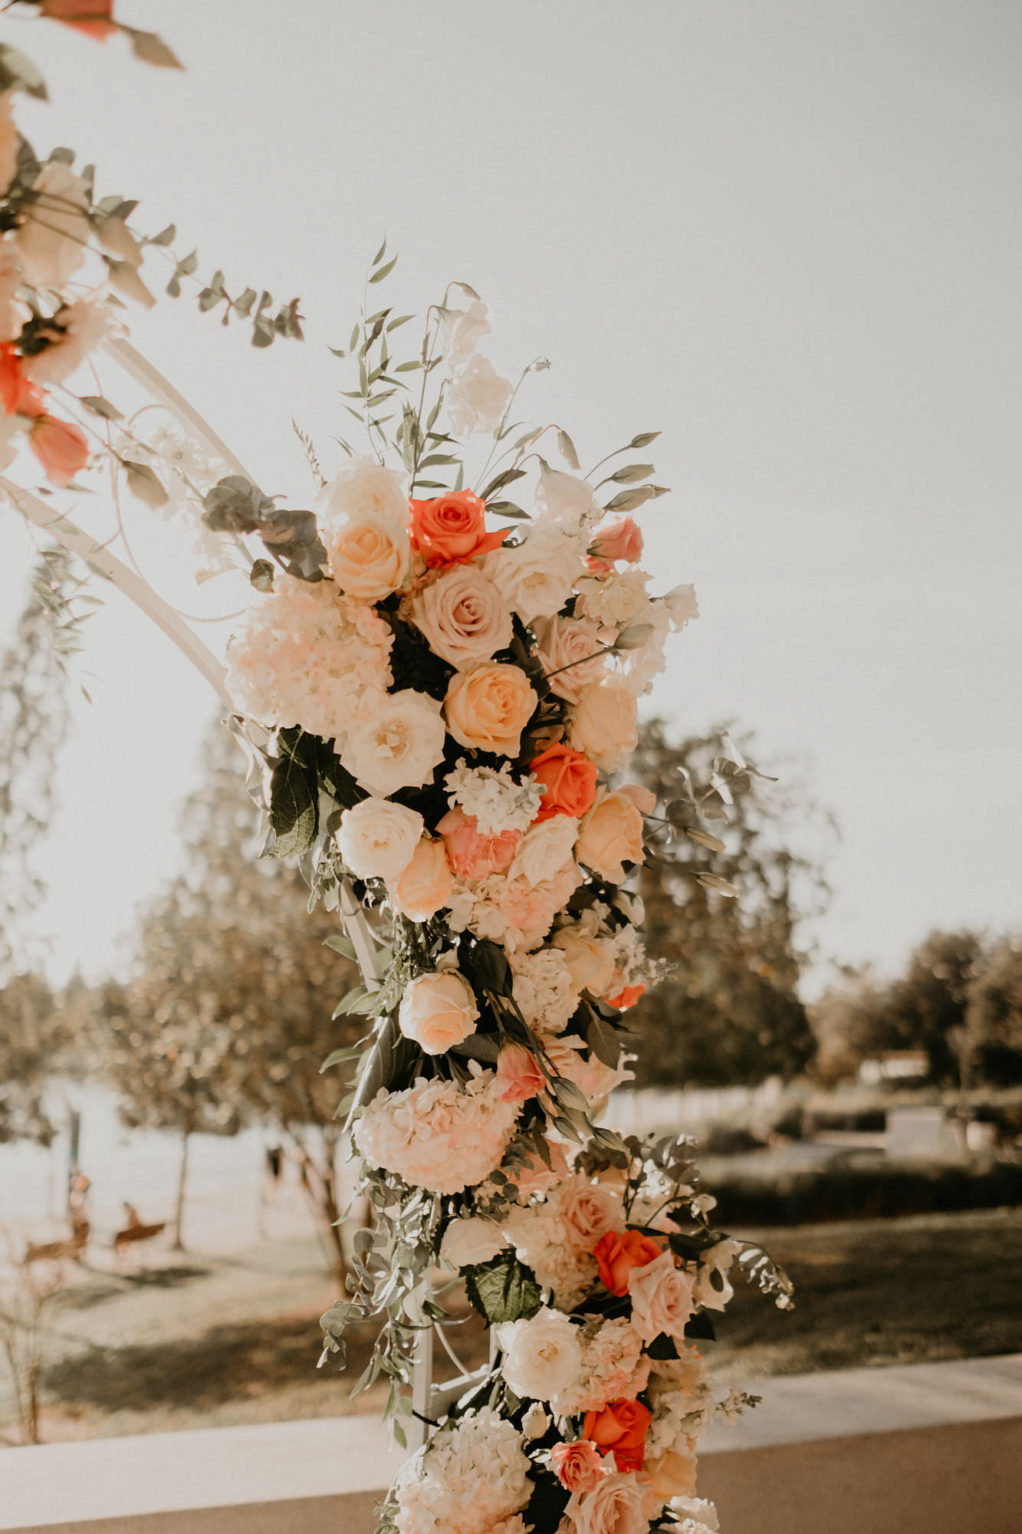 Outdoor Wedding Ceremony Arch Floral Arrangement with Peach Salmon Coral Roses White Hydrangea and Eucalyptus Greenery